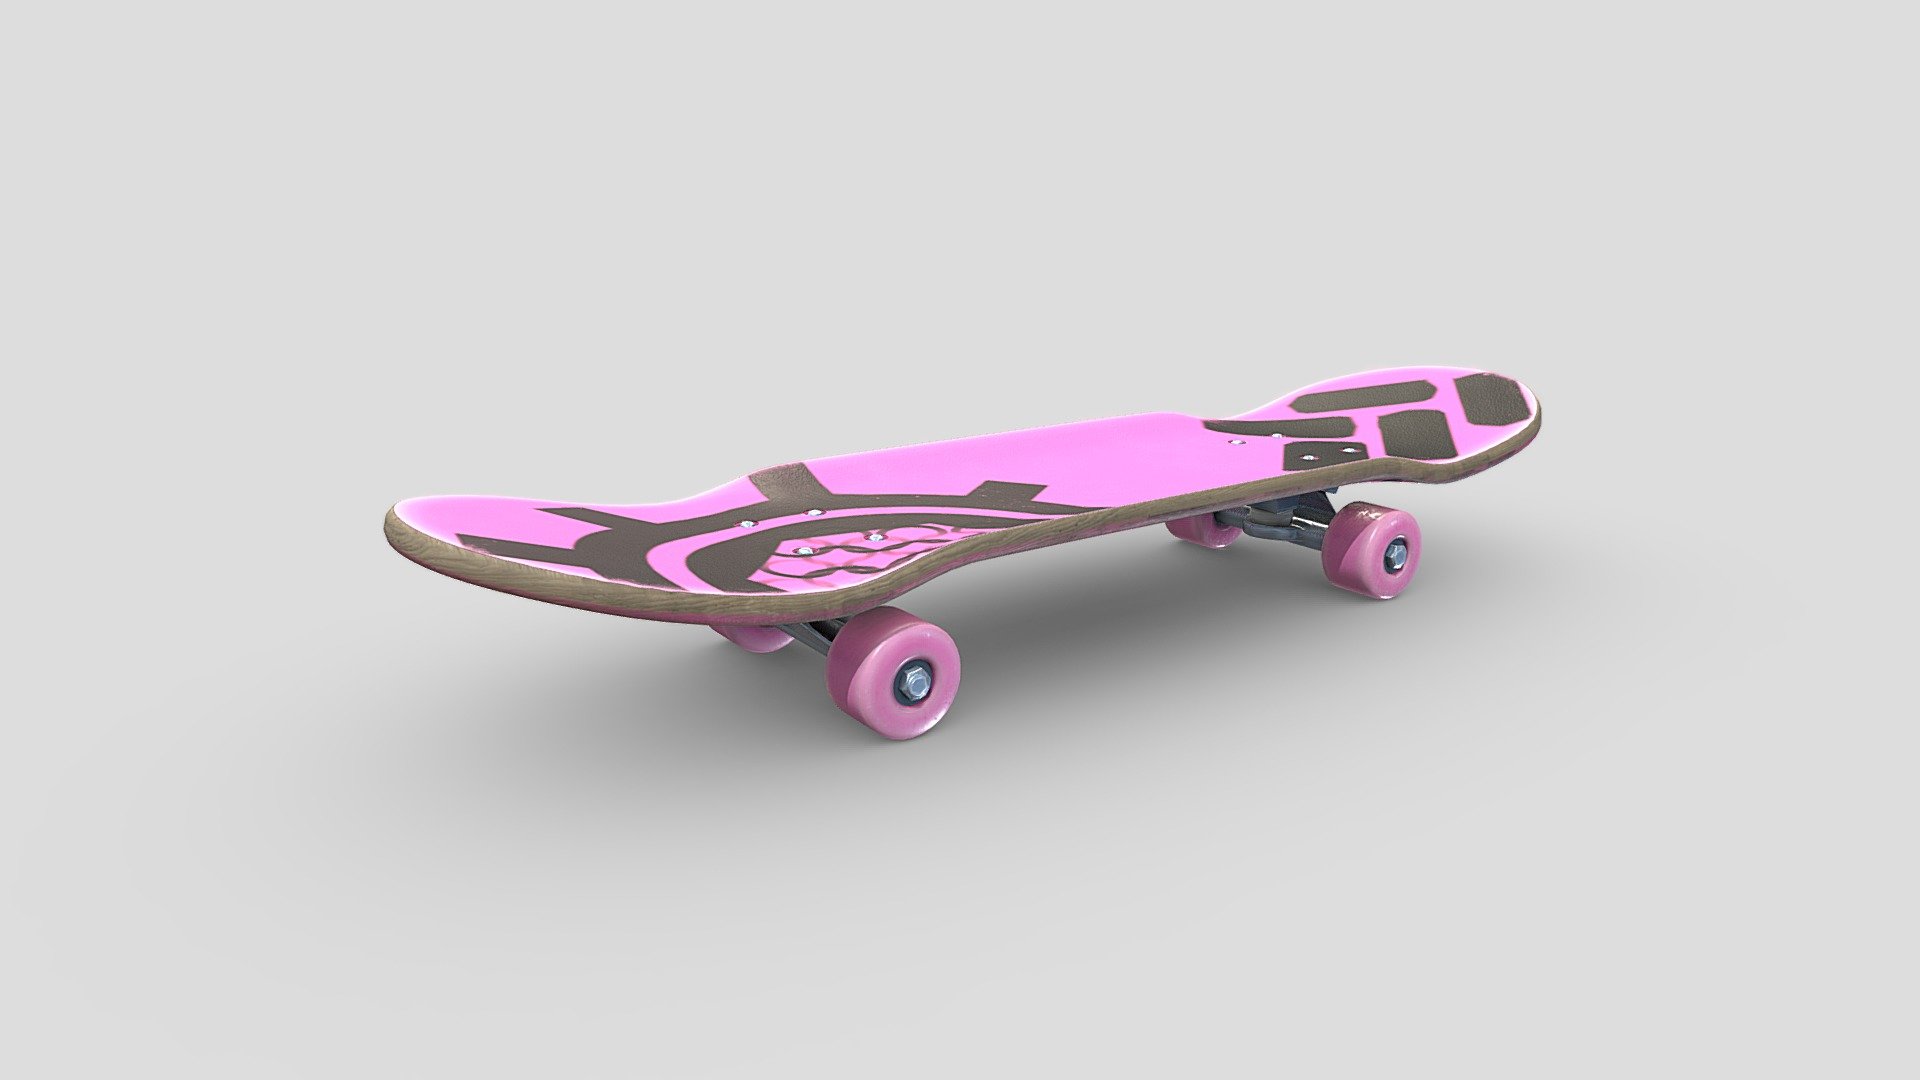 Skateboard collection -  Pink

10 532 Tris
7 360 Vert
4K Textures :
 - Albedo
 - Normal
 - Metalness
 - Roughness

See the whole skateboard collection : https://skfb.ly/oxFrQ

Buy the collection of skateboard (10) and save 20% on the price of each skatesboard - Skateboard collection -  Pink - Buy Royalty Free 3D model by Jerome (dijix009) (@dijix009) 3d model